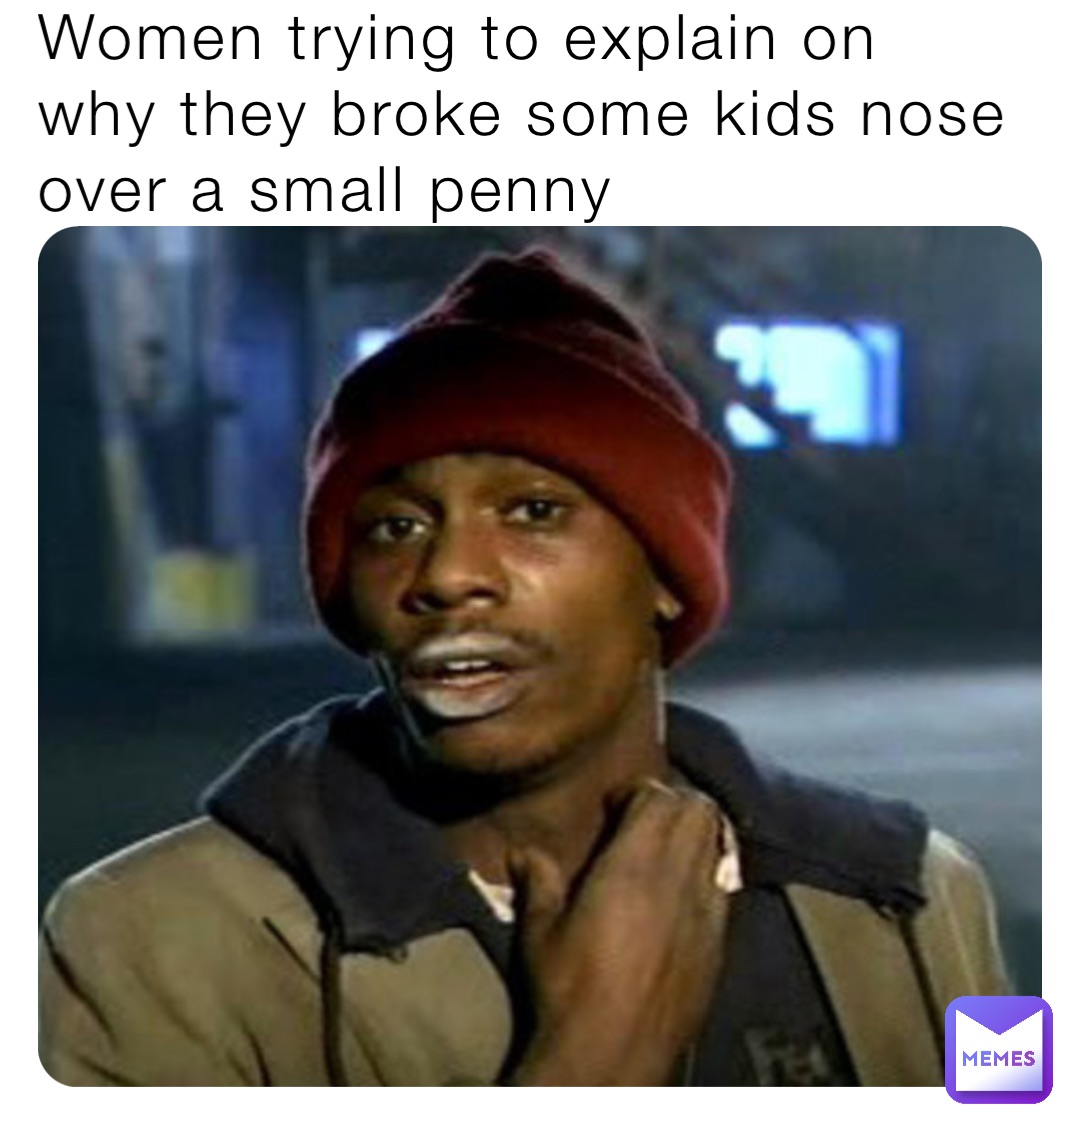 Women trying to explain on why they broke some kids nose over a small penny